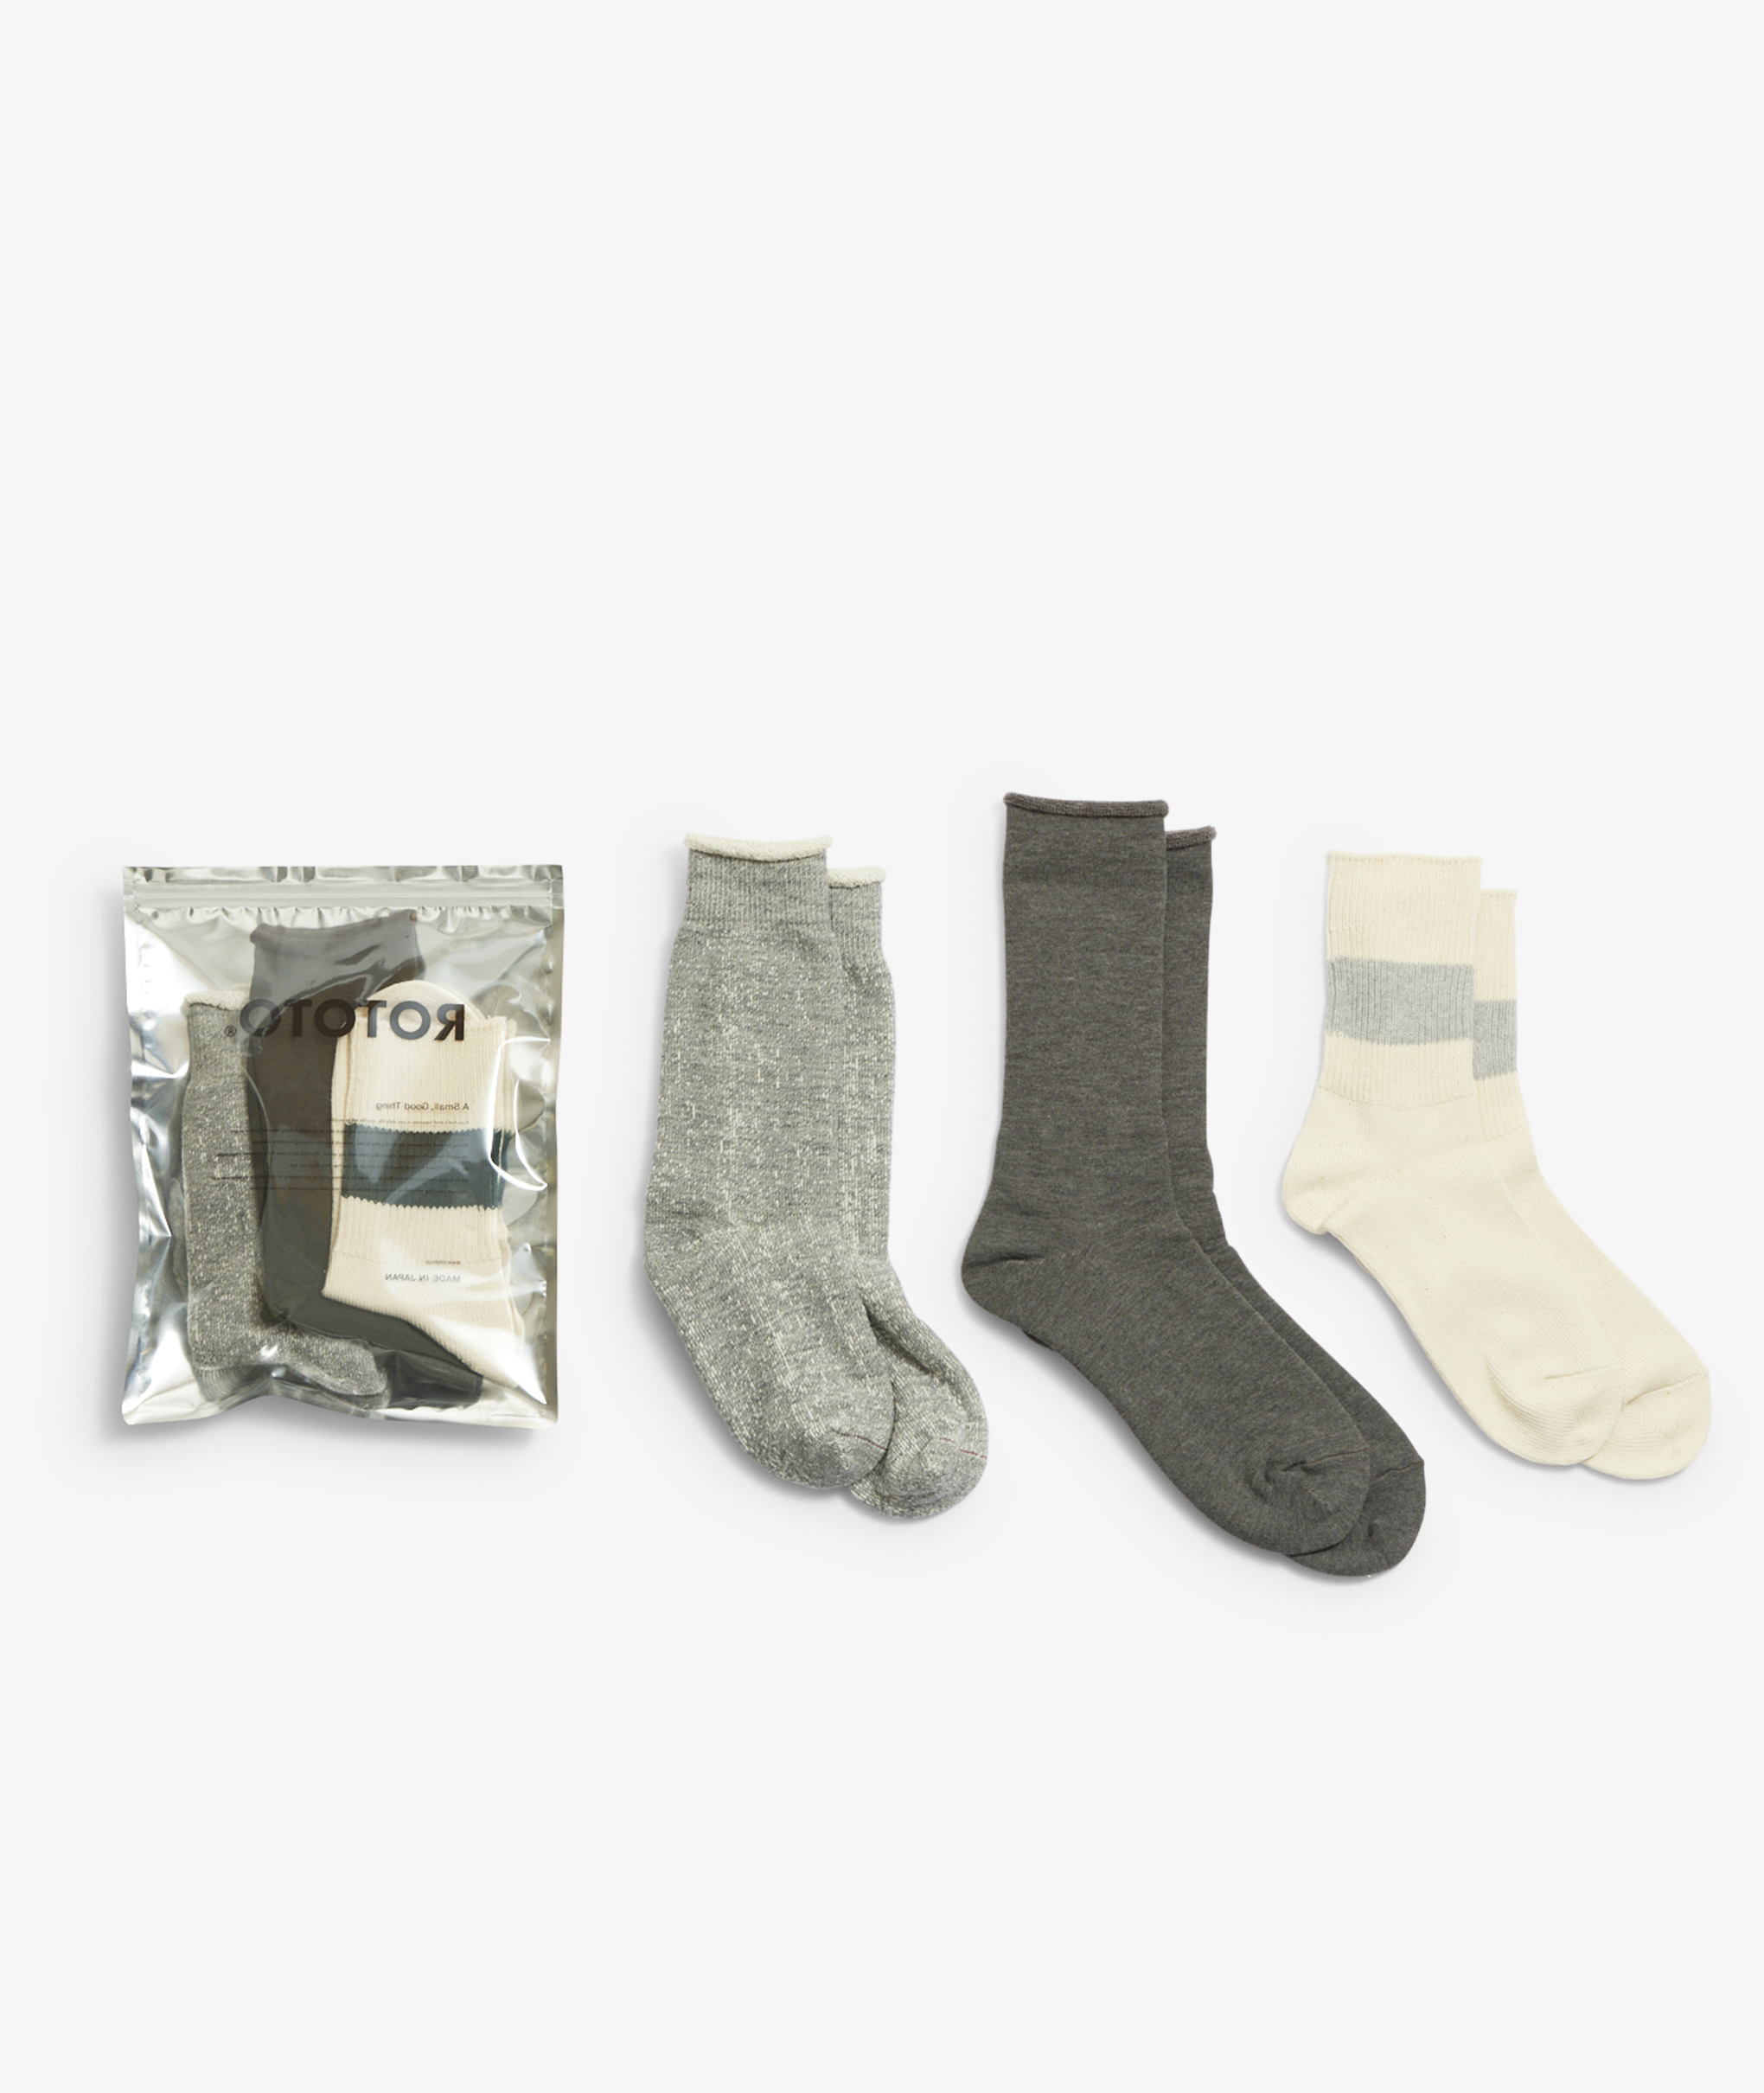 Norse Store | Shipping Worldwide - RoToTo Special Trio Socks - Gray